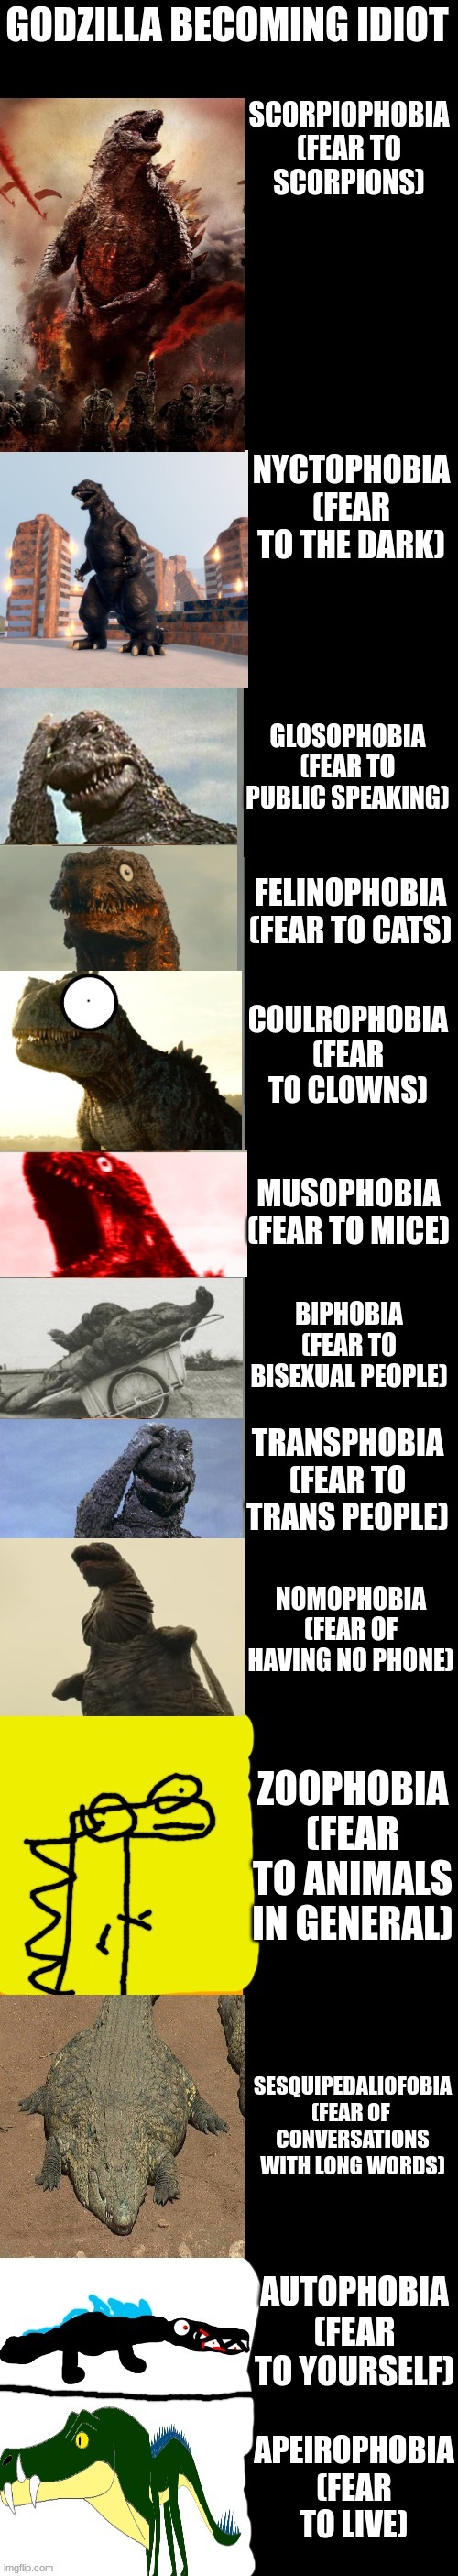 Dumb phobias 2 | SCORPIOPHOBIA
(FEAR TO SCORPIONS); NYCTOPHOBIA
(FEAR TO THE DARK); GLOSOPHOBIA
(FEAR TO PUBLIC SPEAKING); FELINOPHOBIA
(FEAR TO CATS); COULROPHOBIA
(FEAR TO CLOWNS); MUSOPHOBIA
(FEAR TO MICE); BIPHOBIA
(FEAR TO BISEXUAL PEOPLE); TRANSPHOBIA
(FEAR TO TRANS PEOPLE); NOMOPHOBIA
(FEAR OF HAVING NO PHONE); ZOOPHOBIA
(FEAR TO ANIMALS IN GENERAL); SESQUIPEDALIOFOBIA
(FEAR OF  CONVERSATIONS WITH LONG WORDS); AUTOPHOBIA
(FEAR TO YOURSELF); APEIROPHOBIA
(FEAR TO LIVE) | image tagged in godzilla becoming idiot,phobia,transphobic | made w/ Imgflip meme maker